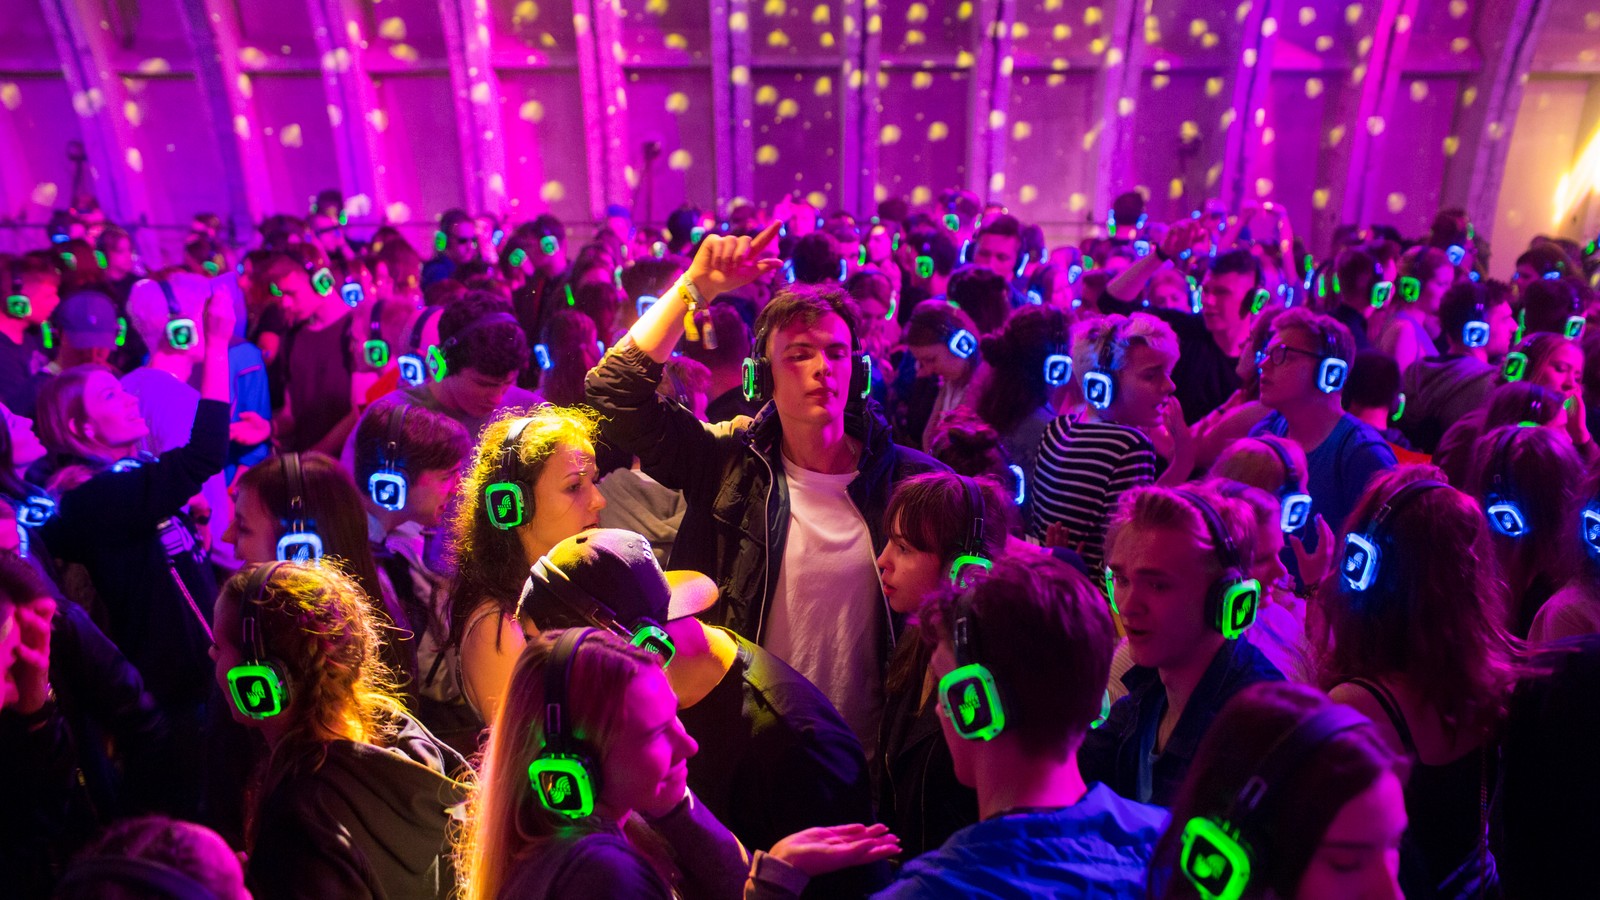 I Went to a Silent Disco as an Old - The Atlantic